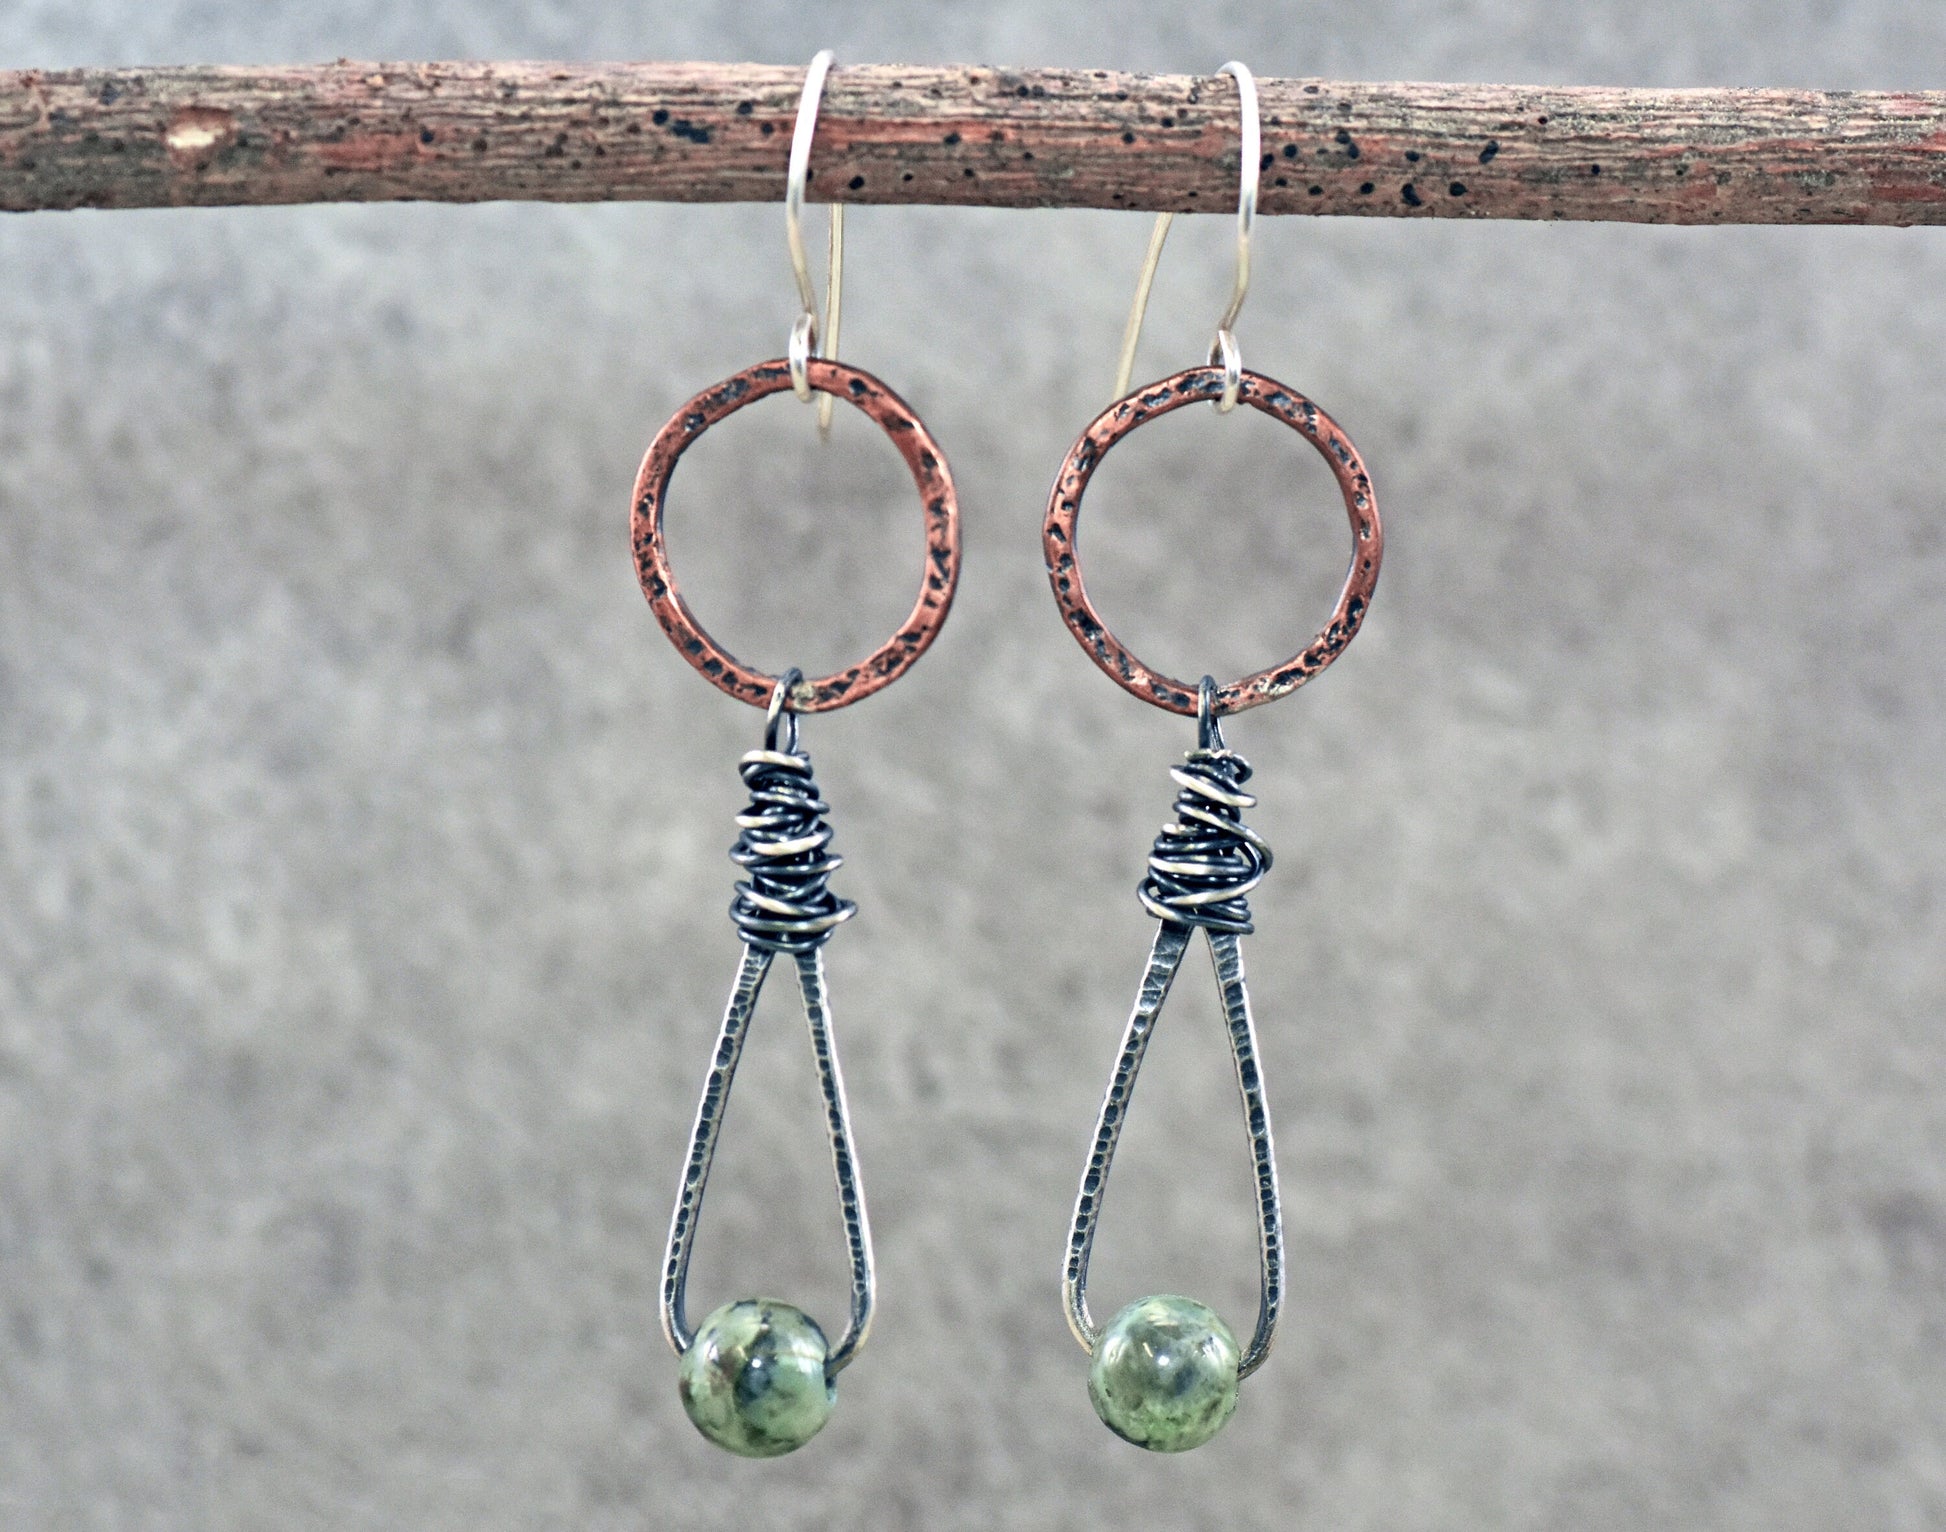 African Turquoise Jasper Earrings, Unique Mixed Metal Dangles, Light Green Gemstone Jewelry, Copper and Sterling Silver